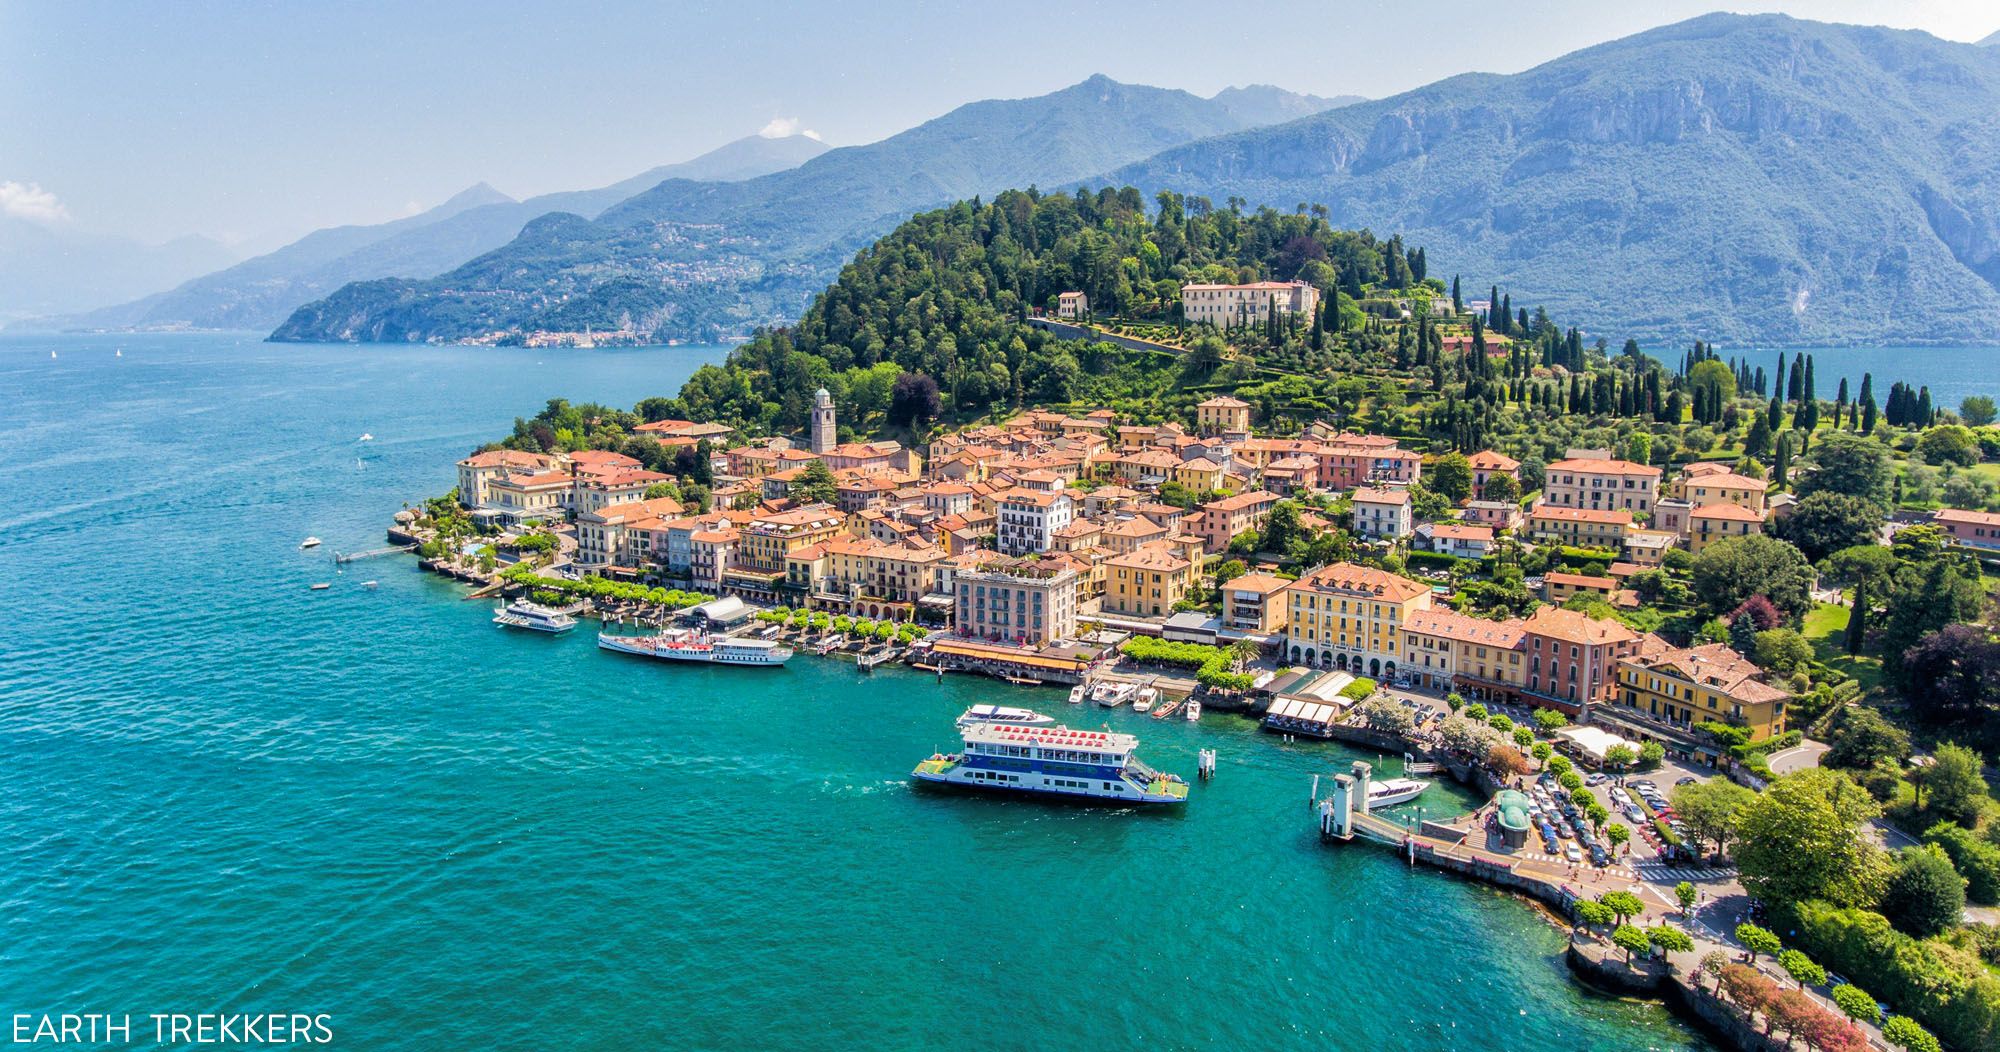 Featured image for “How to Plan the Perfect Day Trip to Lake Como”